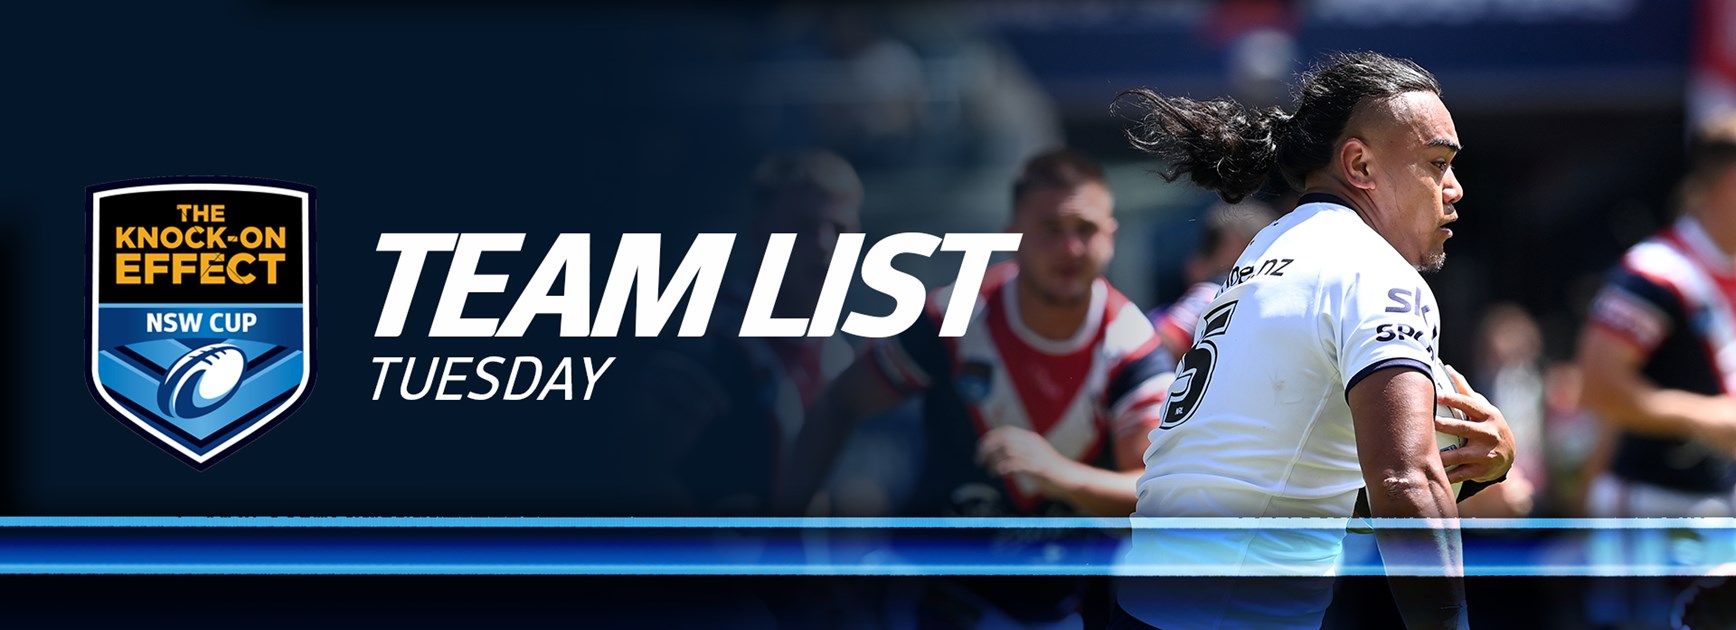 Team List Tuesday | The Knock-On Effect NSW Cup - Round 13